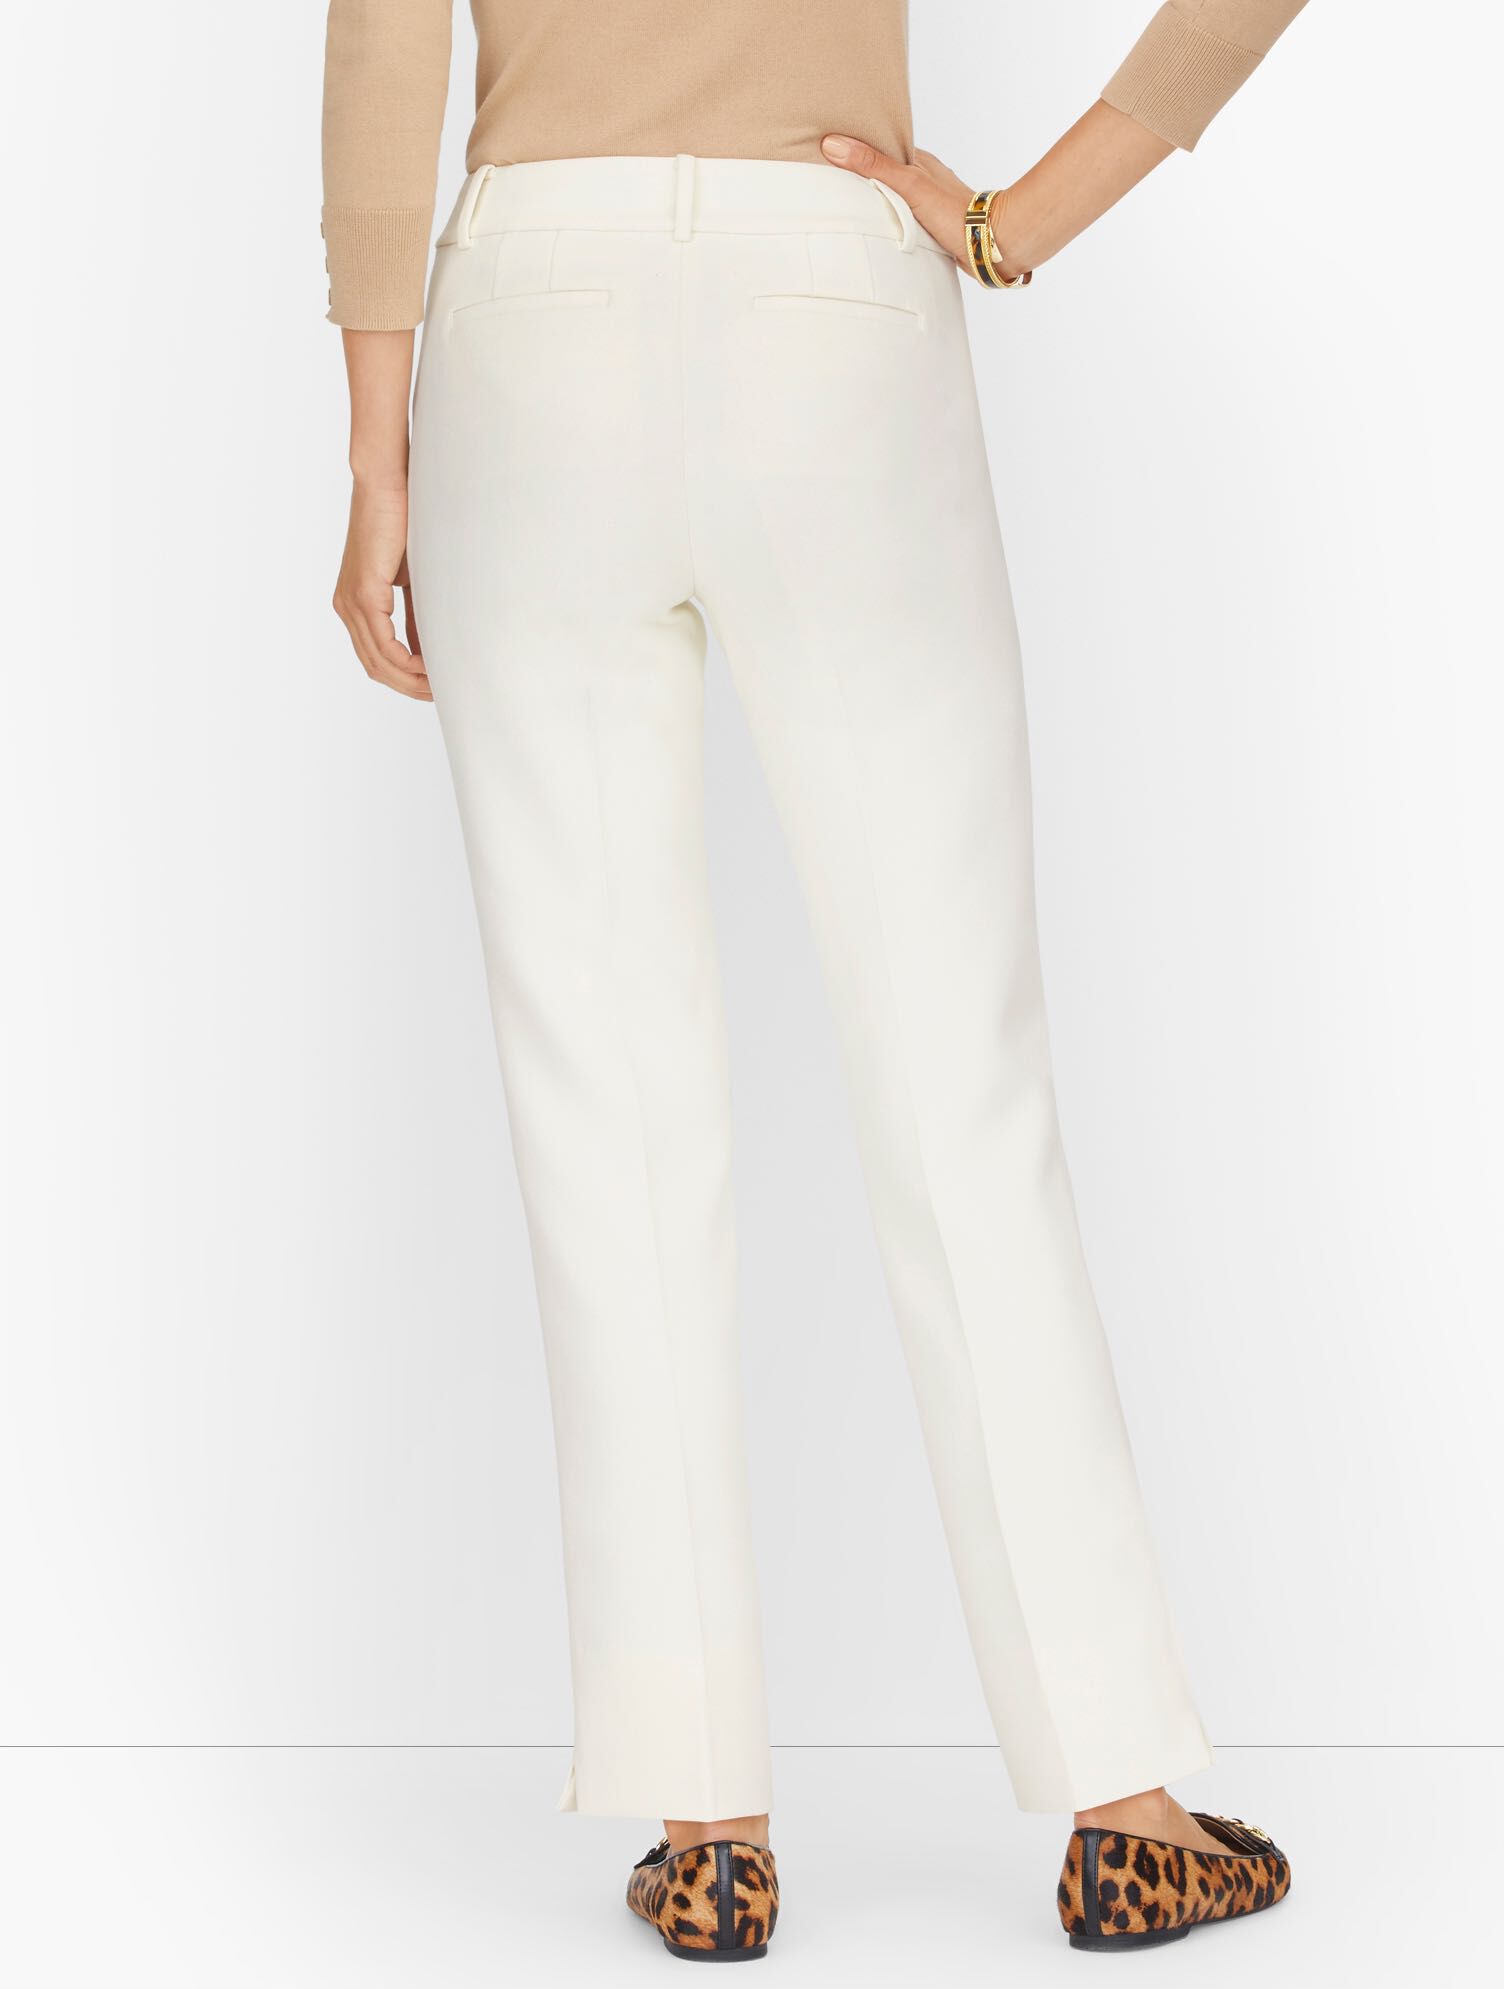 Talbots Hampshire Ankle Pants - Textured Color